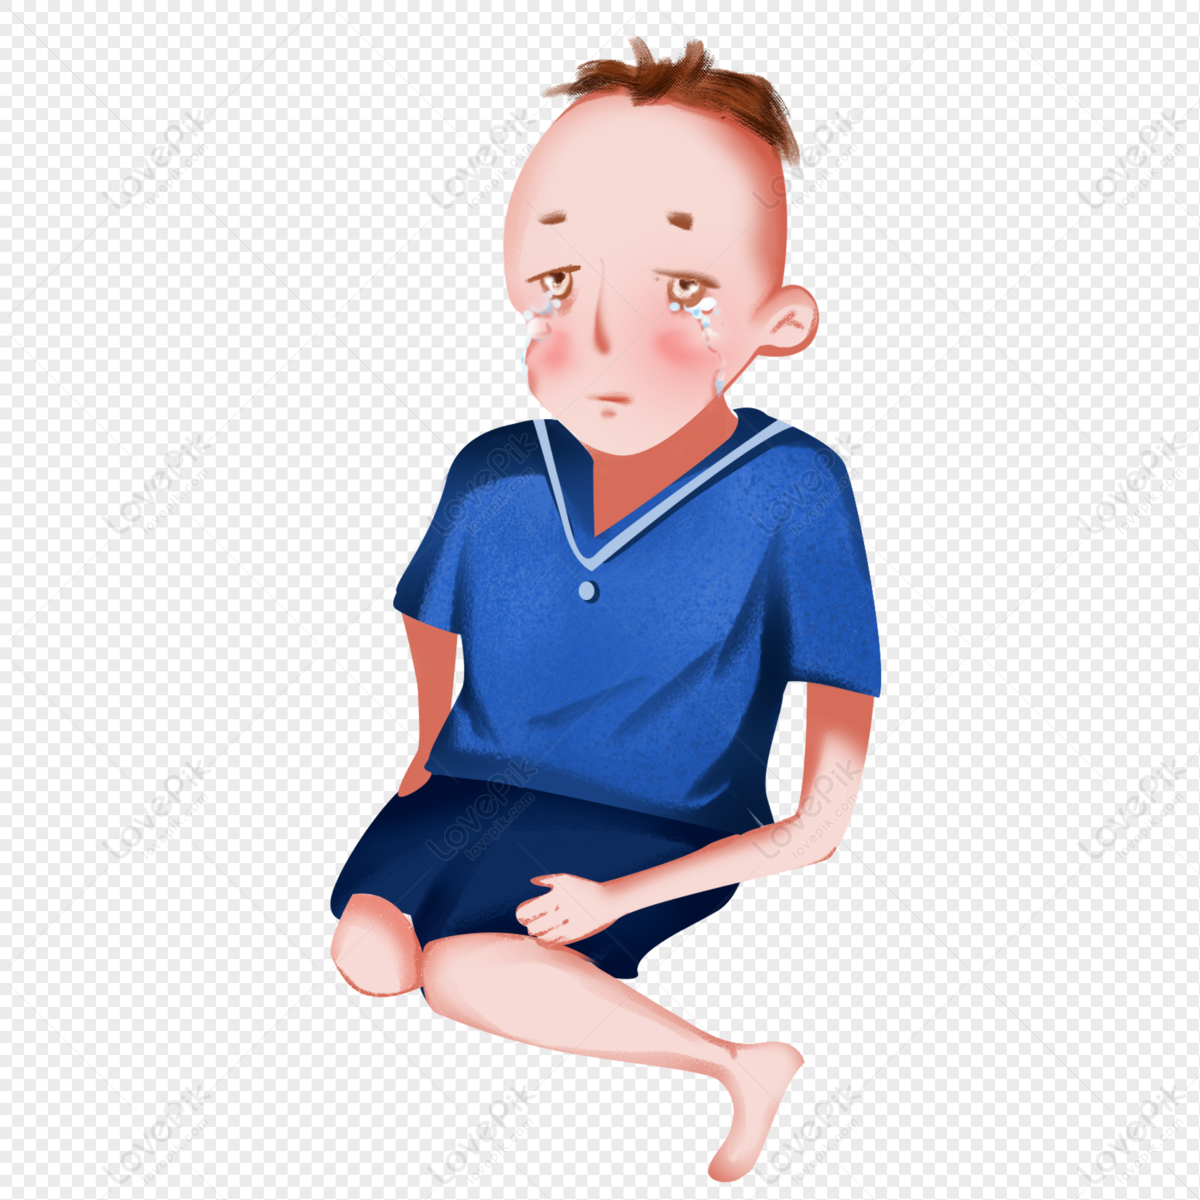 Sad Crying Boy PNG White Transparent And Clipart Image For Free Download -  Lovepik | 401481672